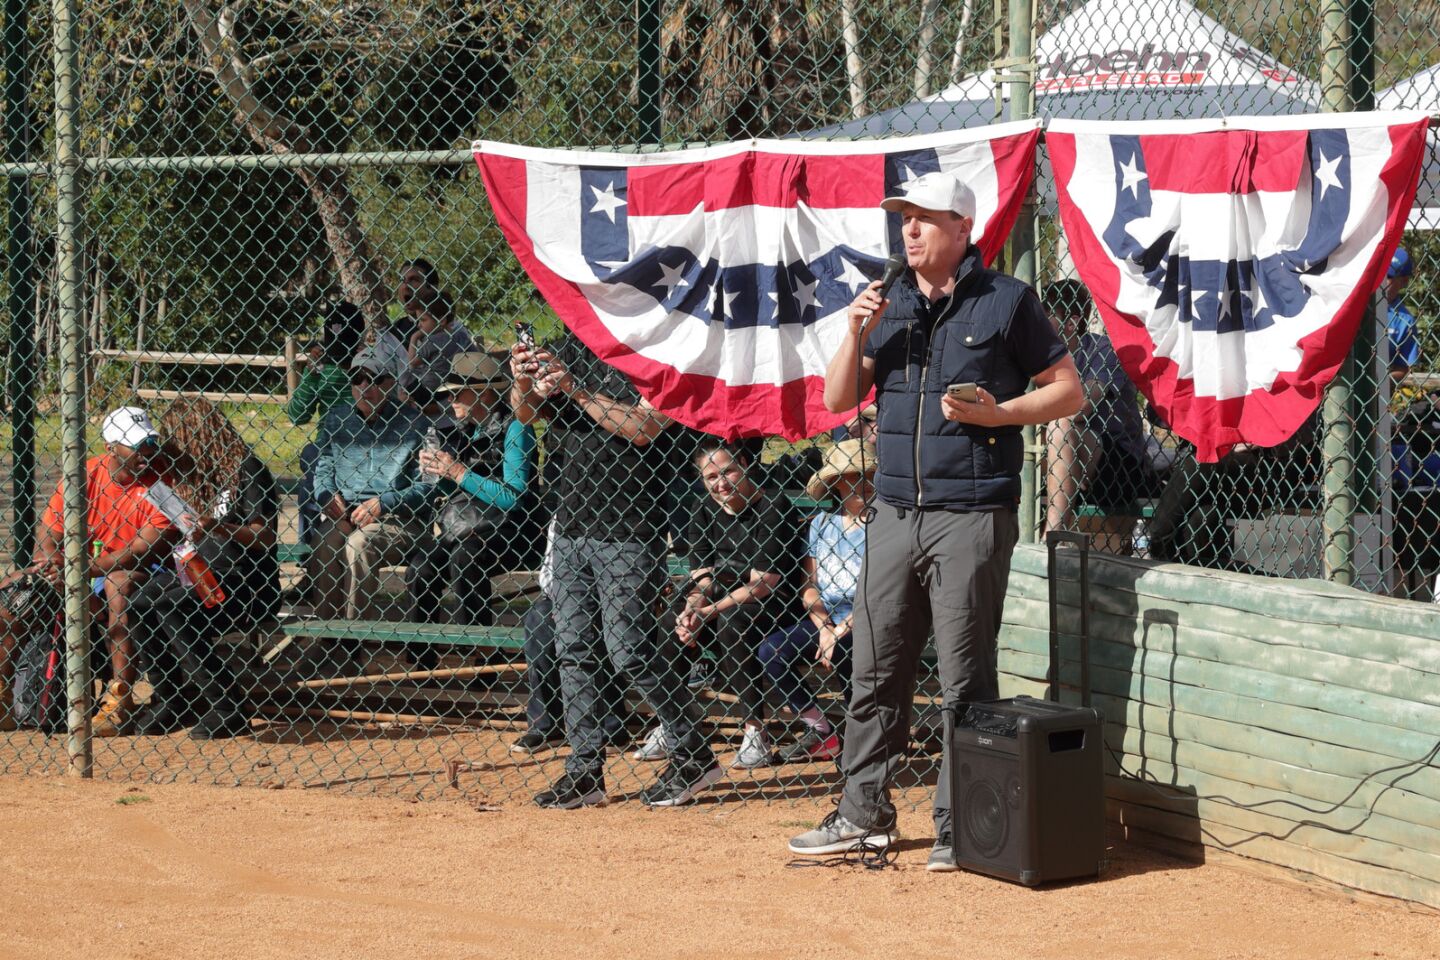 Josh Sherman organized the 2020 RSF Little League Opening Day